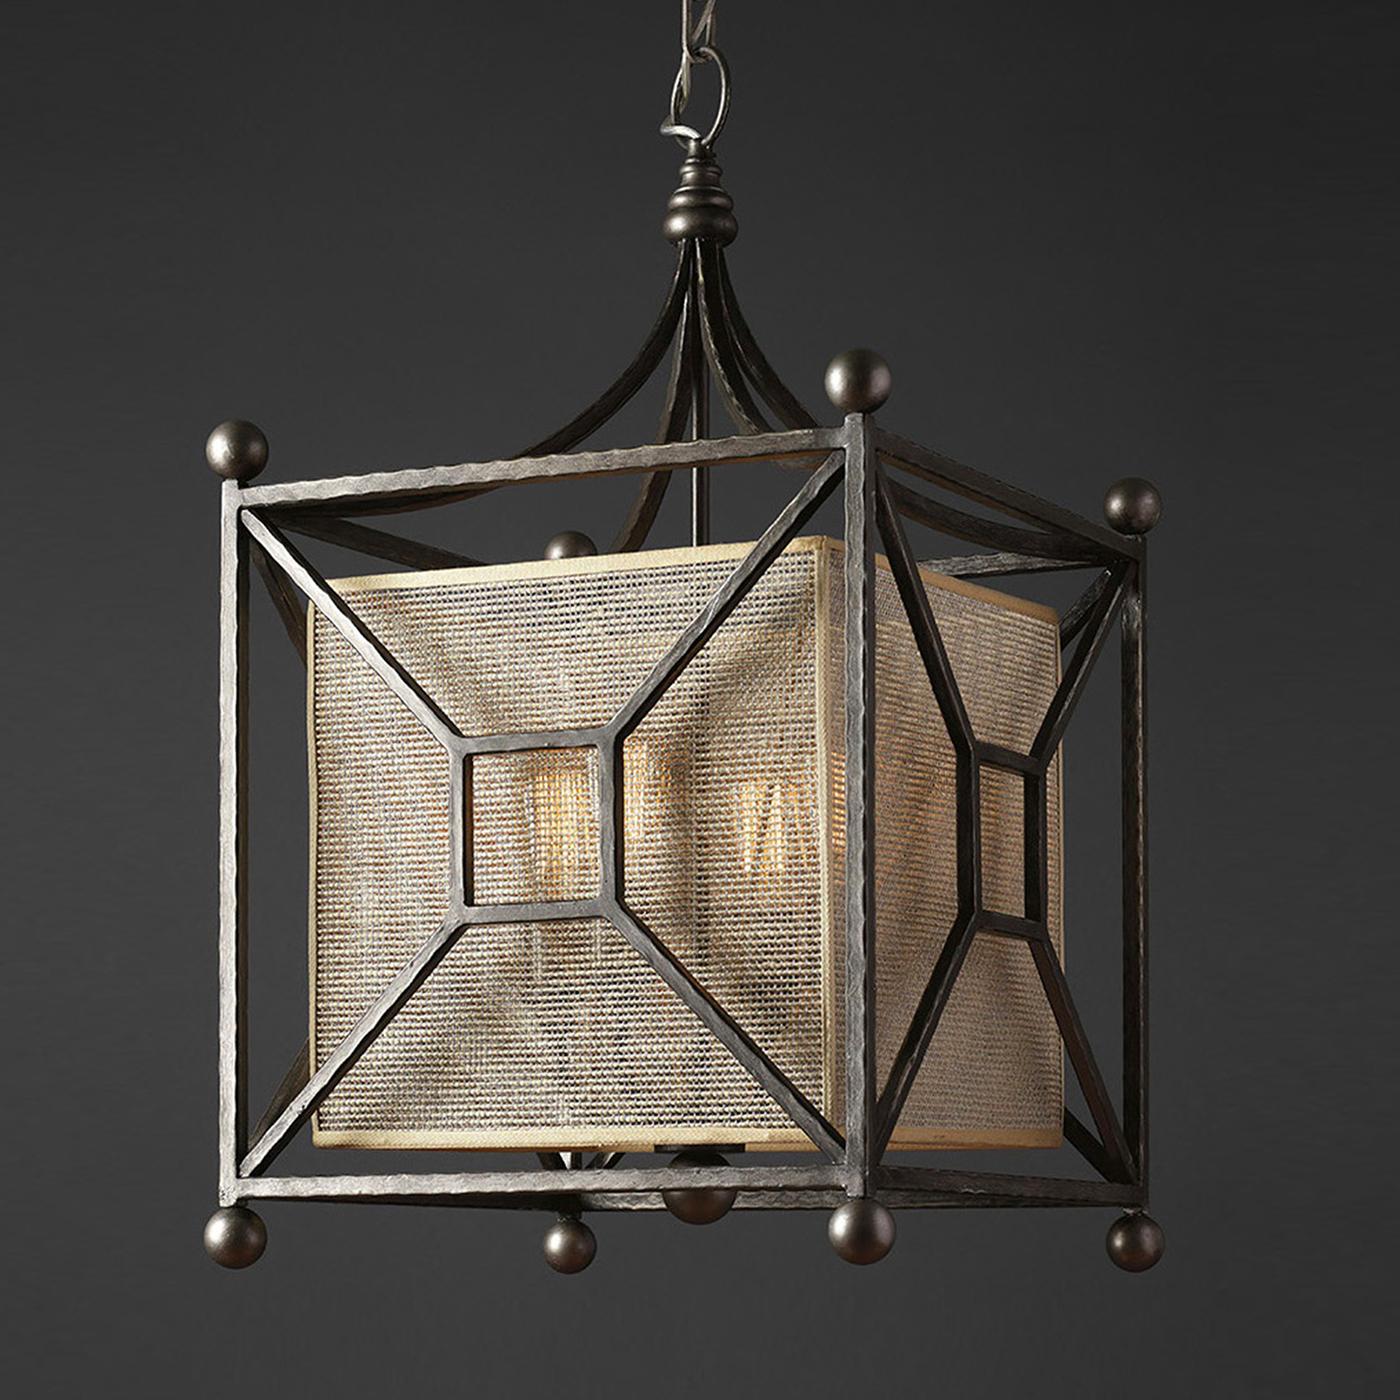 Drawing inspiration from the rich Renaissance tradition that marks the essence of Tuscan decor, this lantern is a special addition to a modern living room or Classic dining room. The hand-forged and hammered stainless steel structure take the form